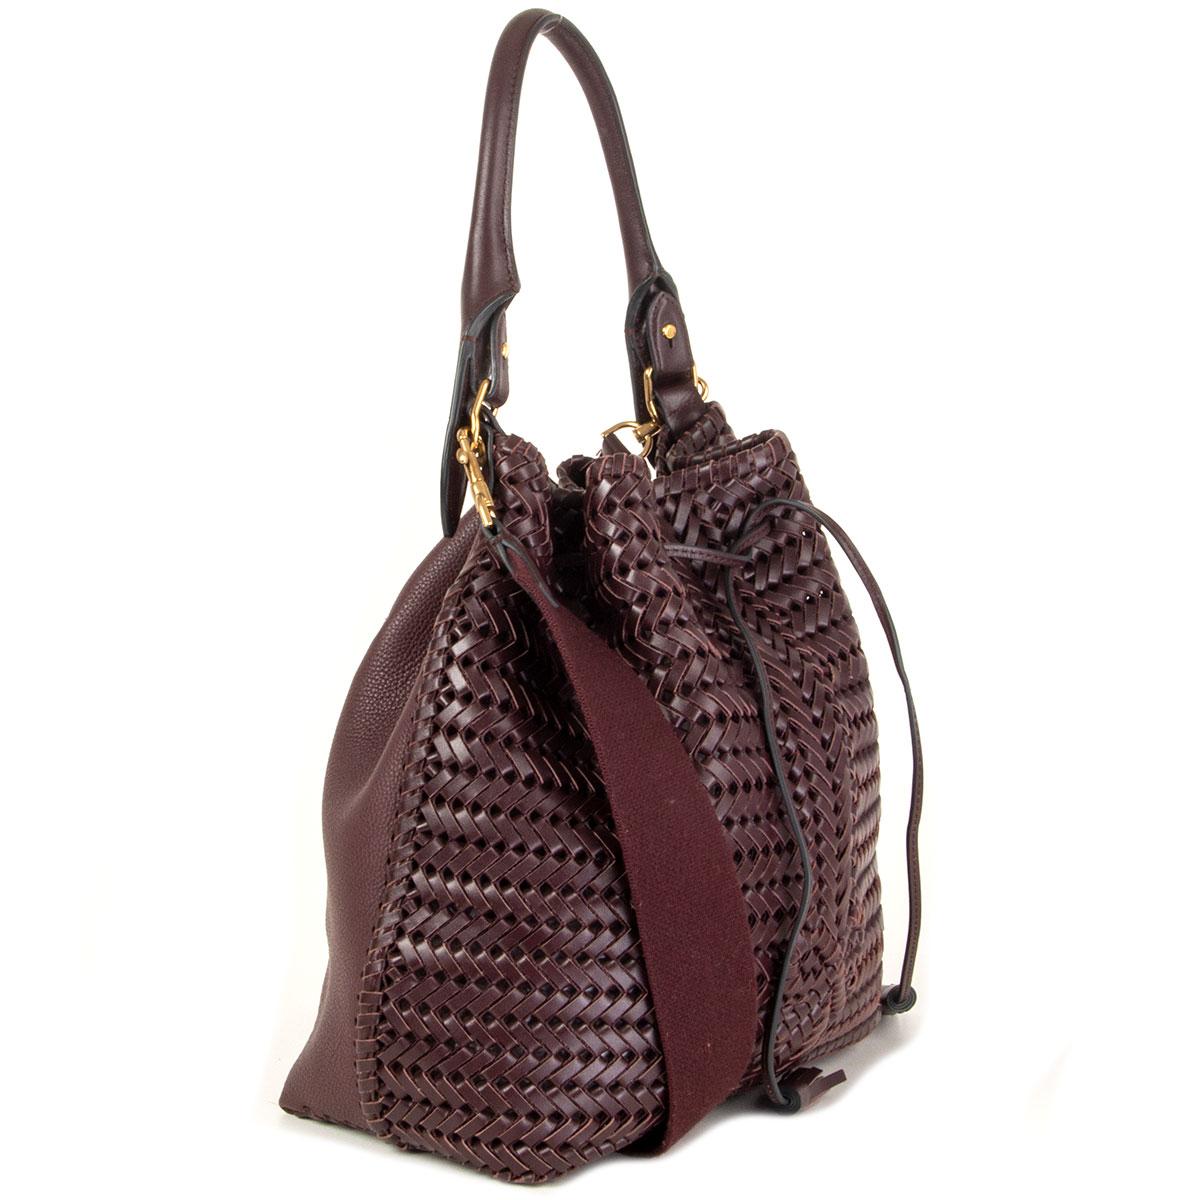 100% authentic Anya Hindmarch Neeson drawstring shoulder bag in burgundy soft woven leather. This intricate hand-woven drawstring bag takes several days to make and has a surprisingly lightweight construction. Detachable canvas shoulder-strap and